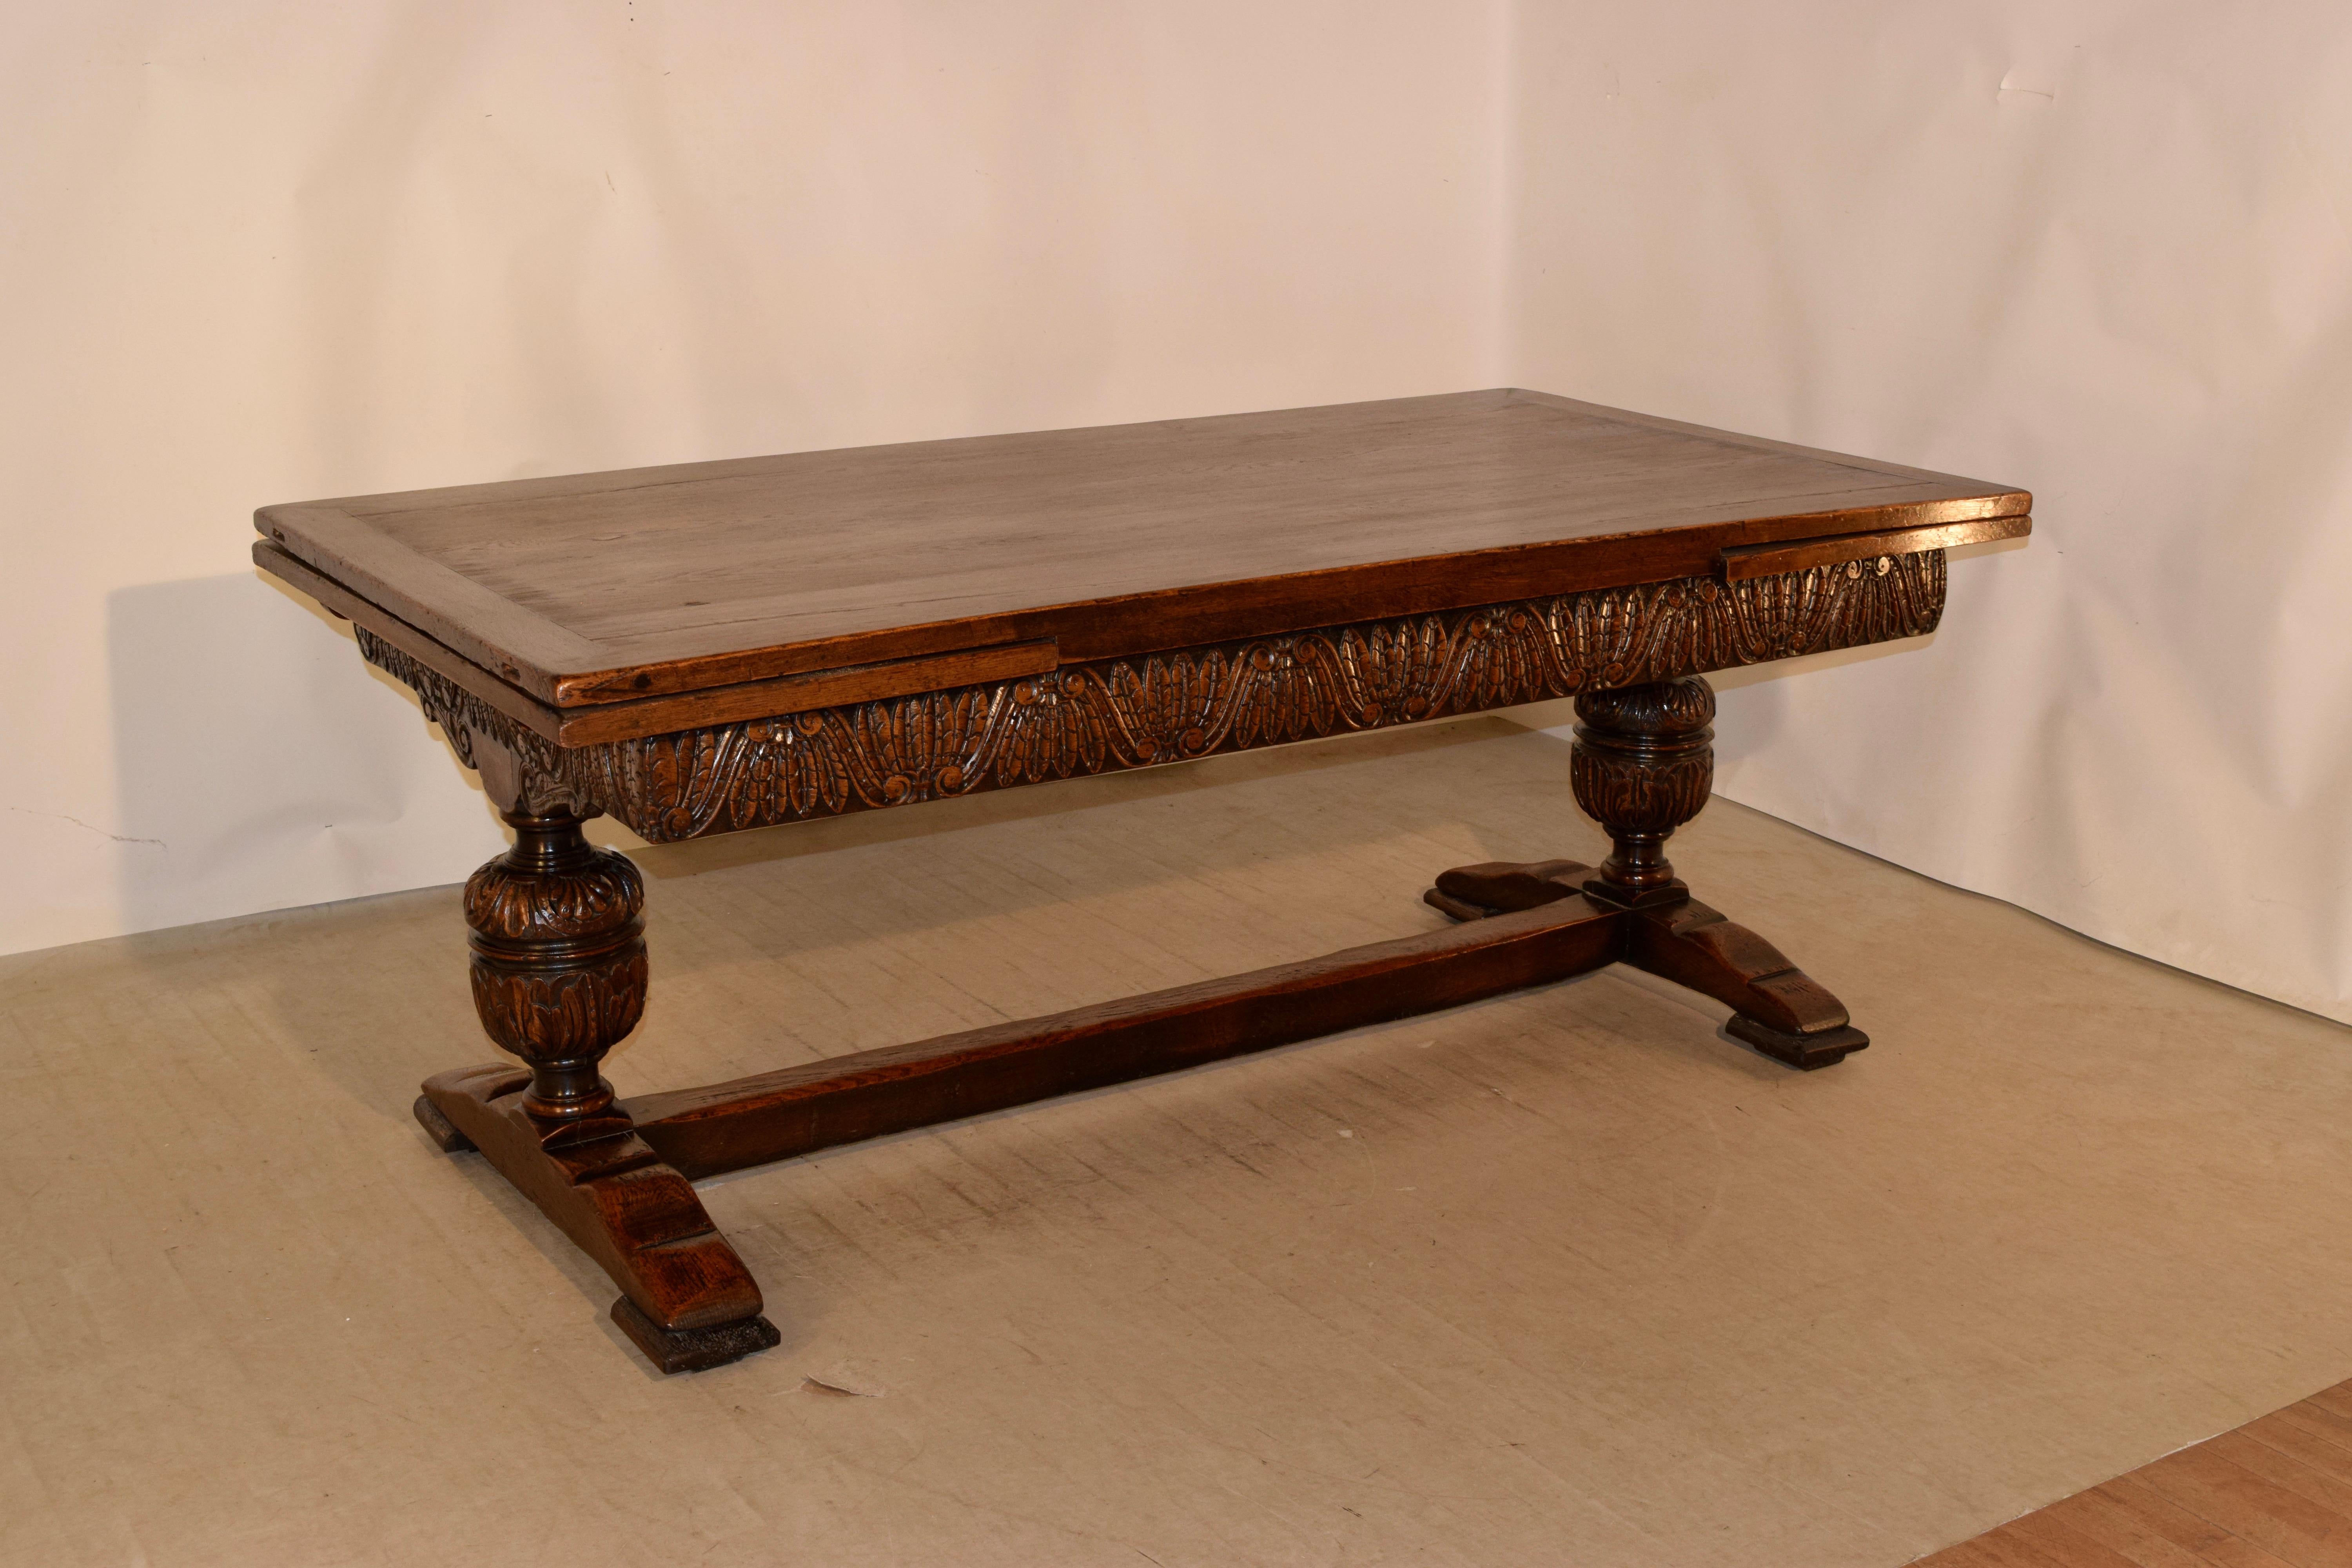 19th century massive oak table from England with draw leaves. The top is banded and has two leaves which draw out for an extended length of 120 inches. The top is supported on a trestle base, which has a wonderfully hand carved decorated apron and